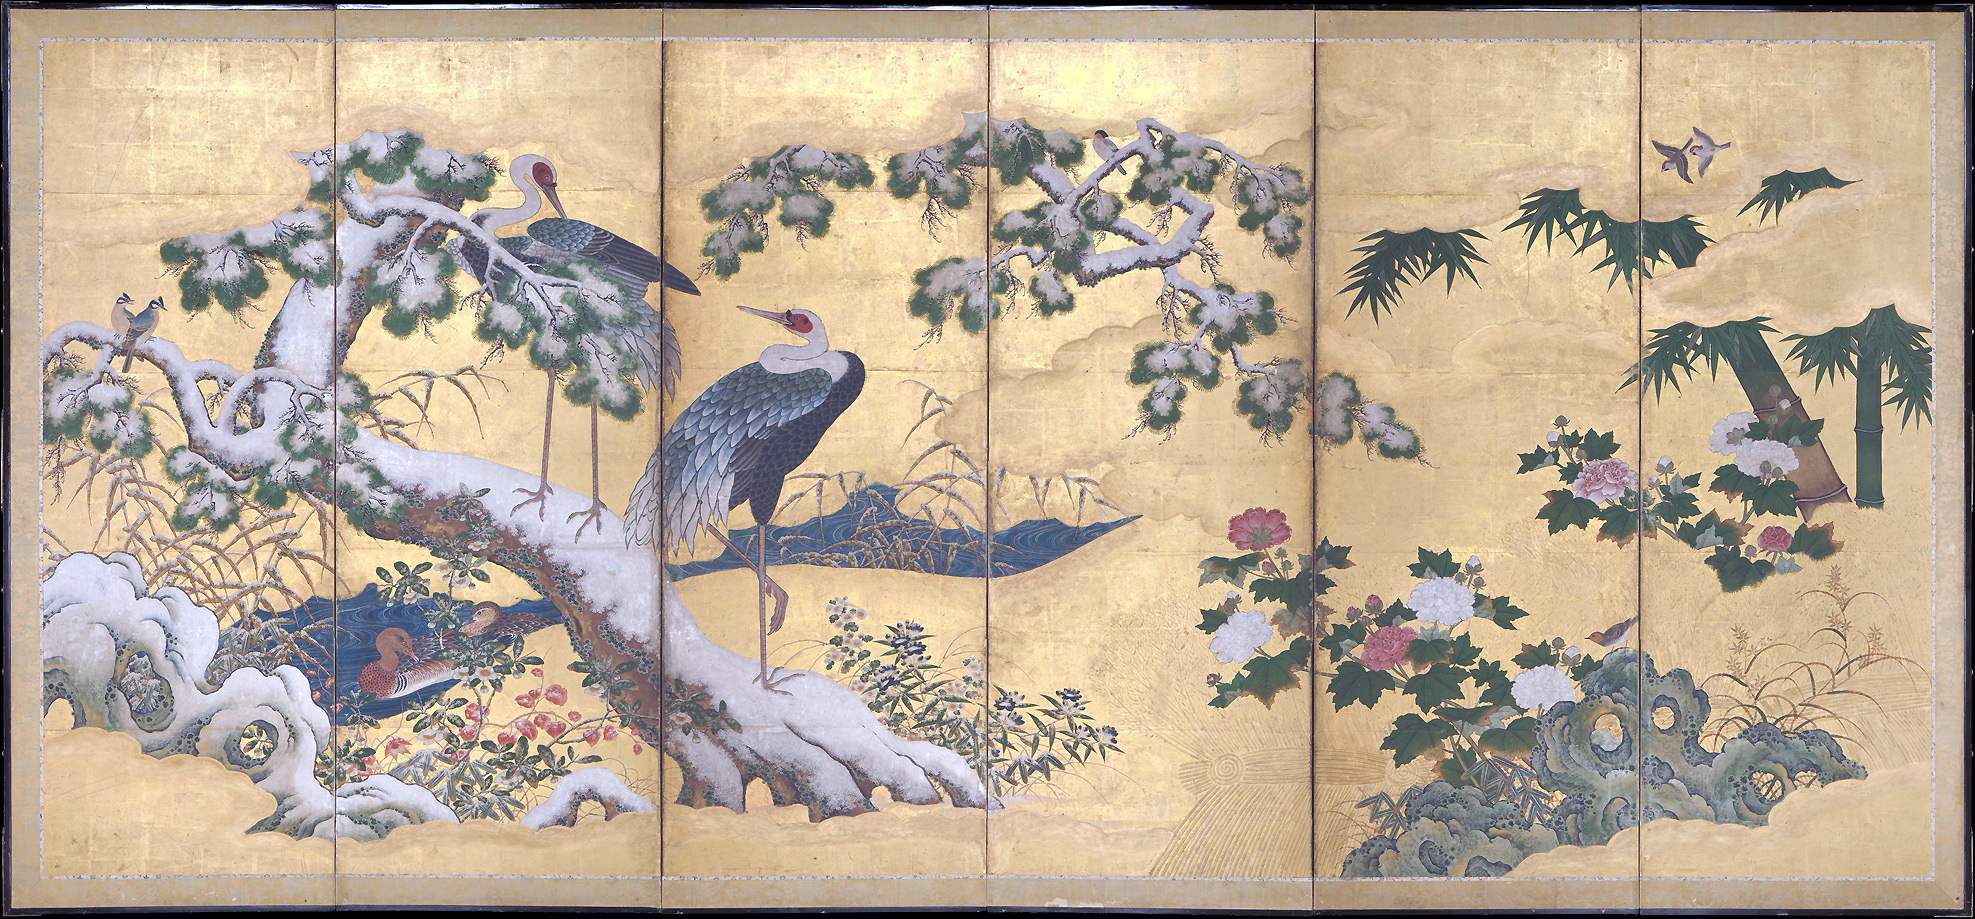 In the style of Kano Motonobu, this painting applies the fusion of Japanese and Chinese thematic and stylistic elements to the pictorial tradition of the four seasons. Birds and Flowers of the Four Seasons, late 16th century, one half of a pair of six-panel folding screens, ink, color, gold, and gold leaf on paper, 160.7 × 360.7 cm (The Metropolitan Museum of Art)